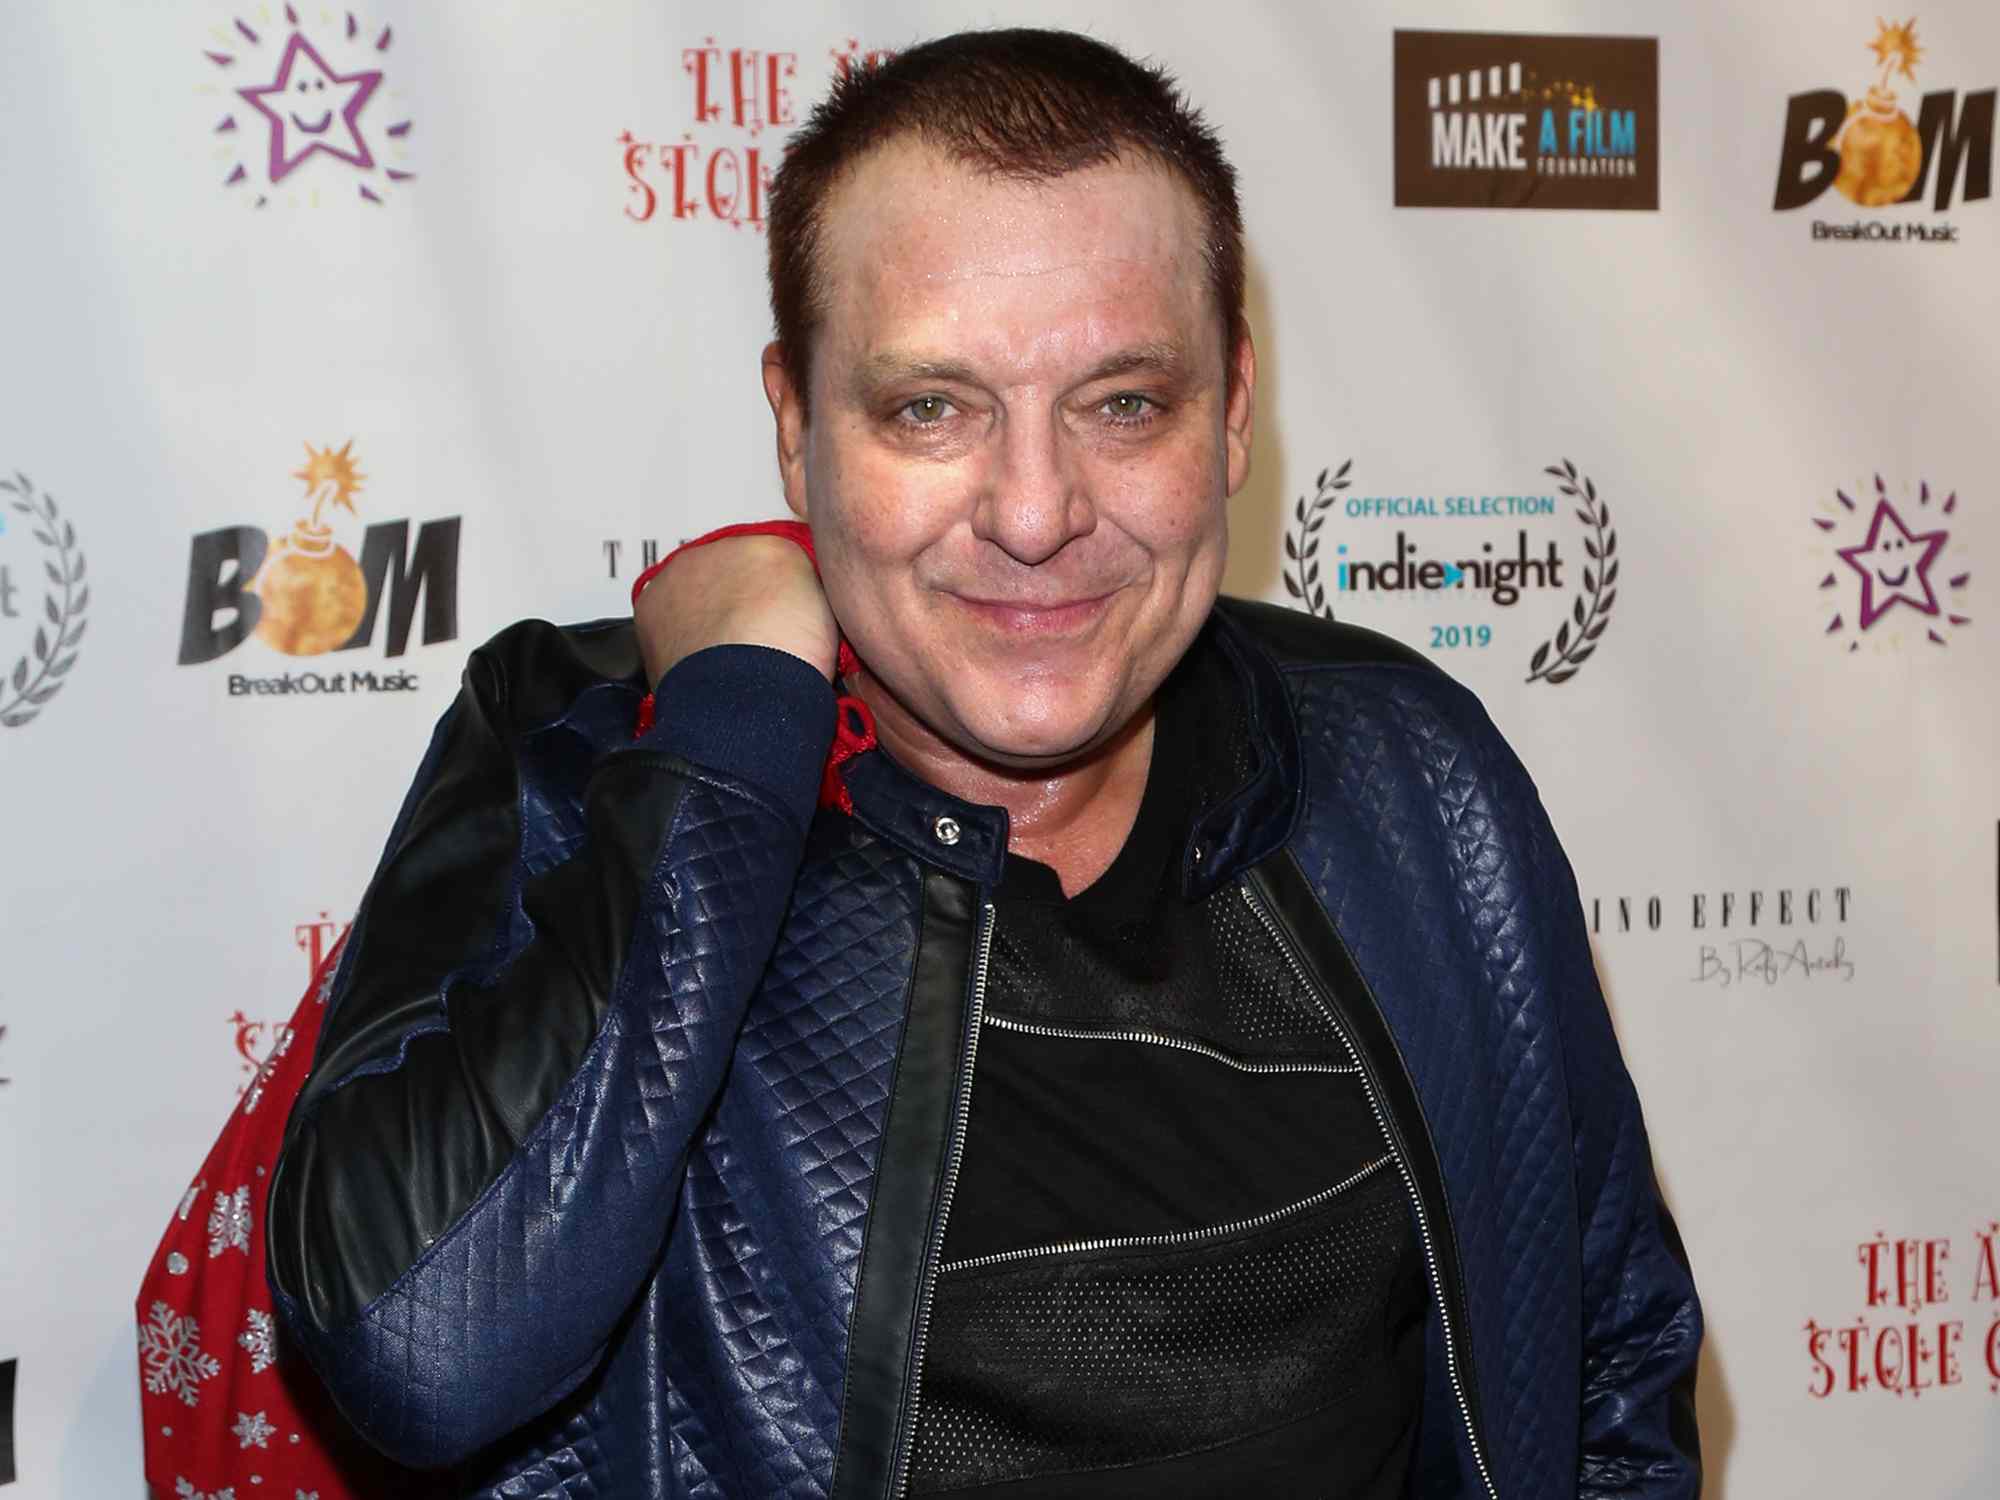 Tom Sizemore attends 'The App That Stole Christmas' charity event at TCL Chinese 6 Theatres on December 14, 2019 in Hollywood, California